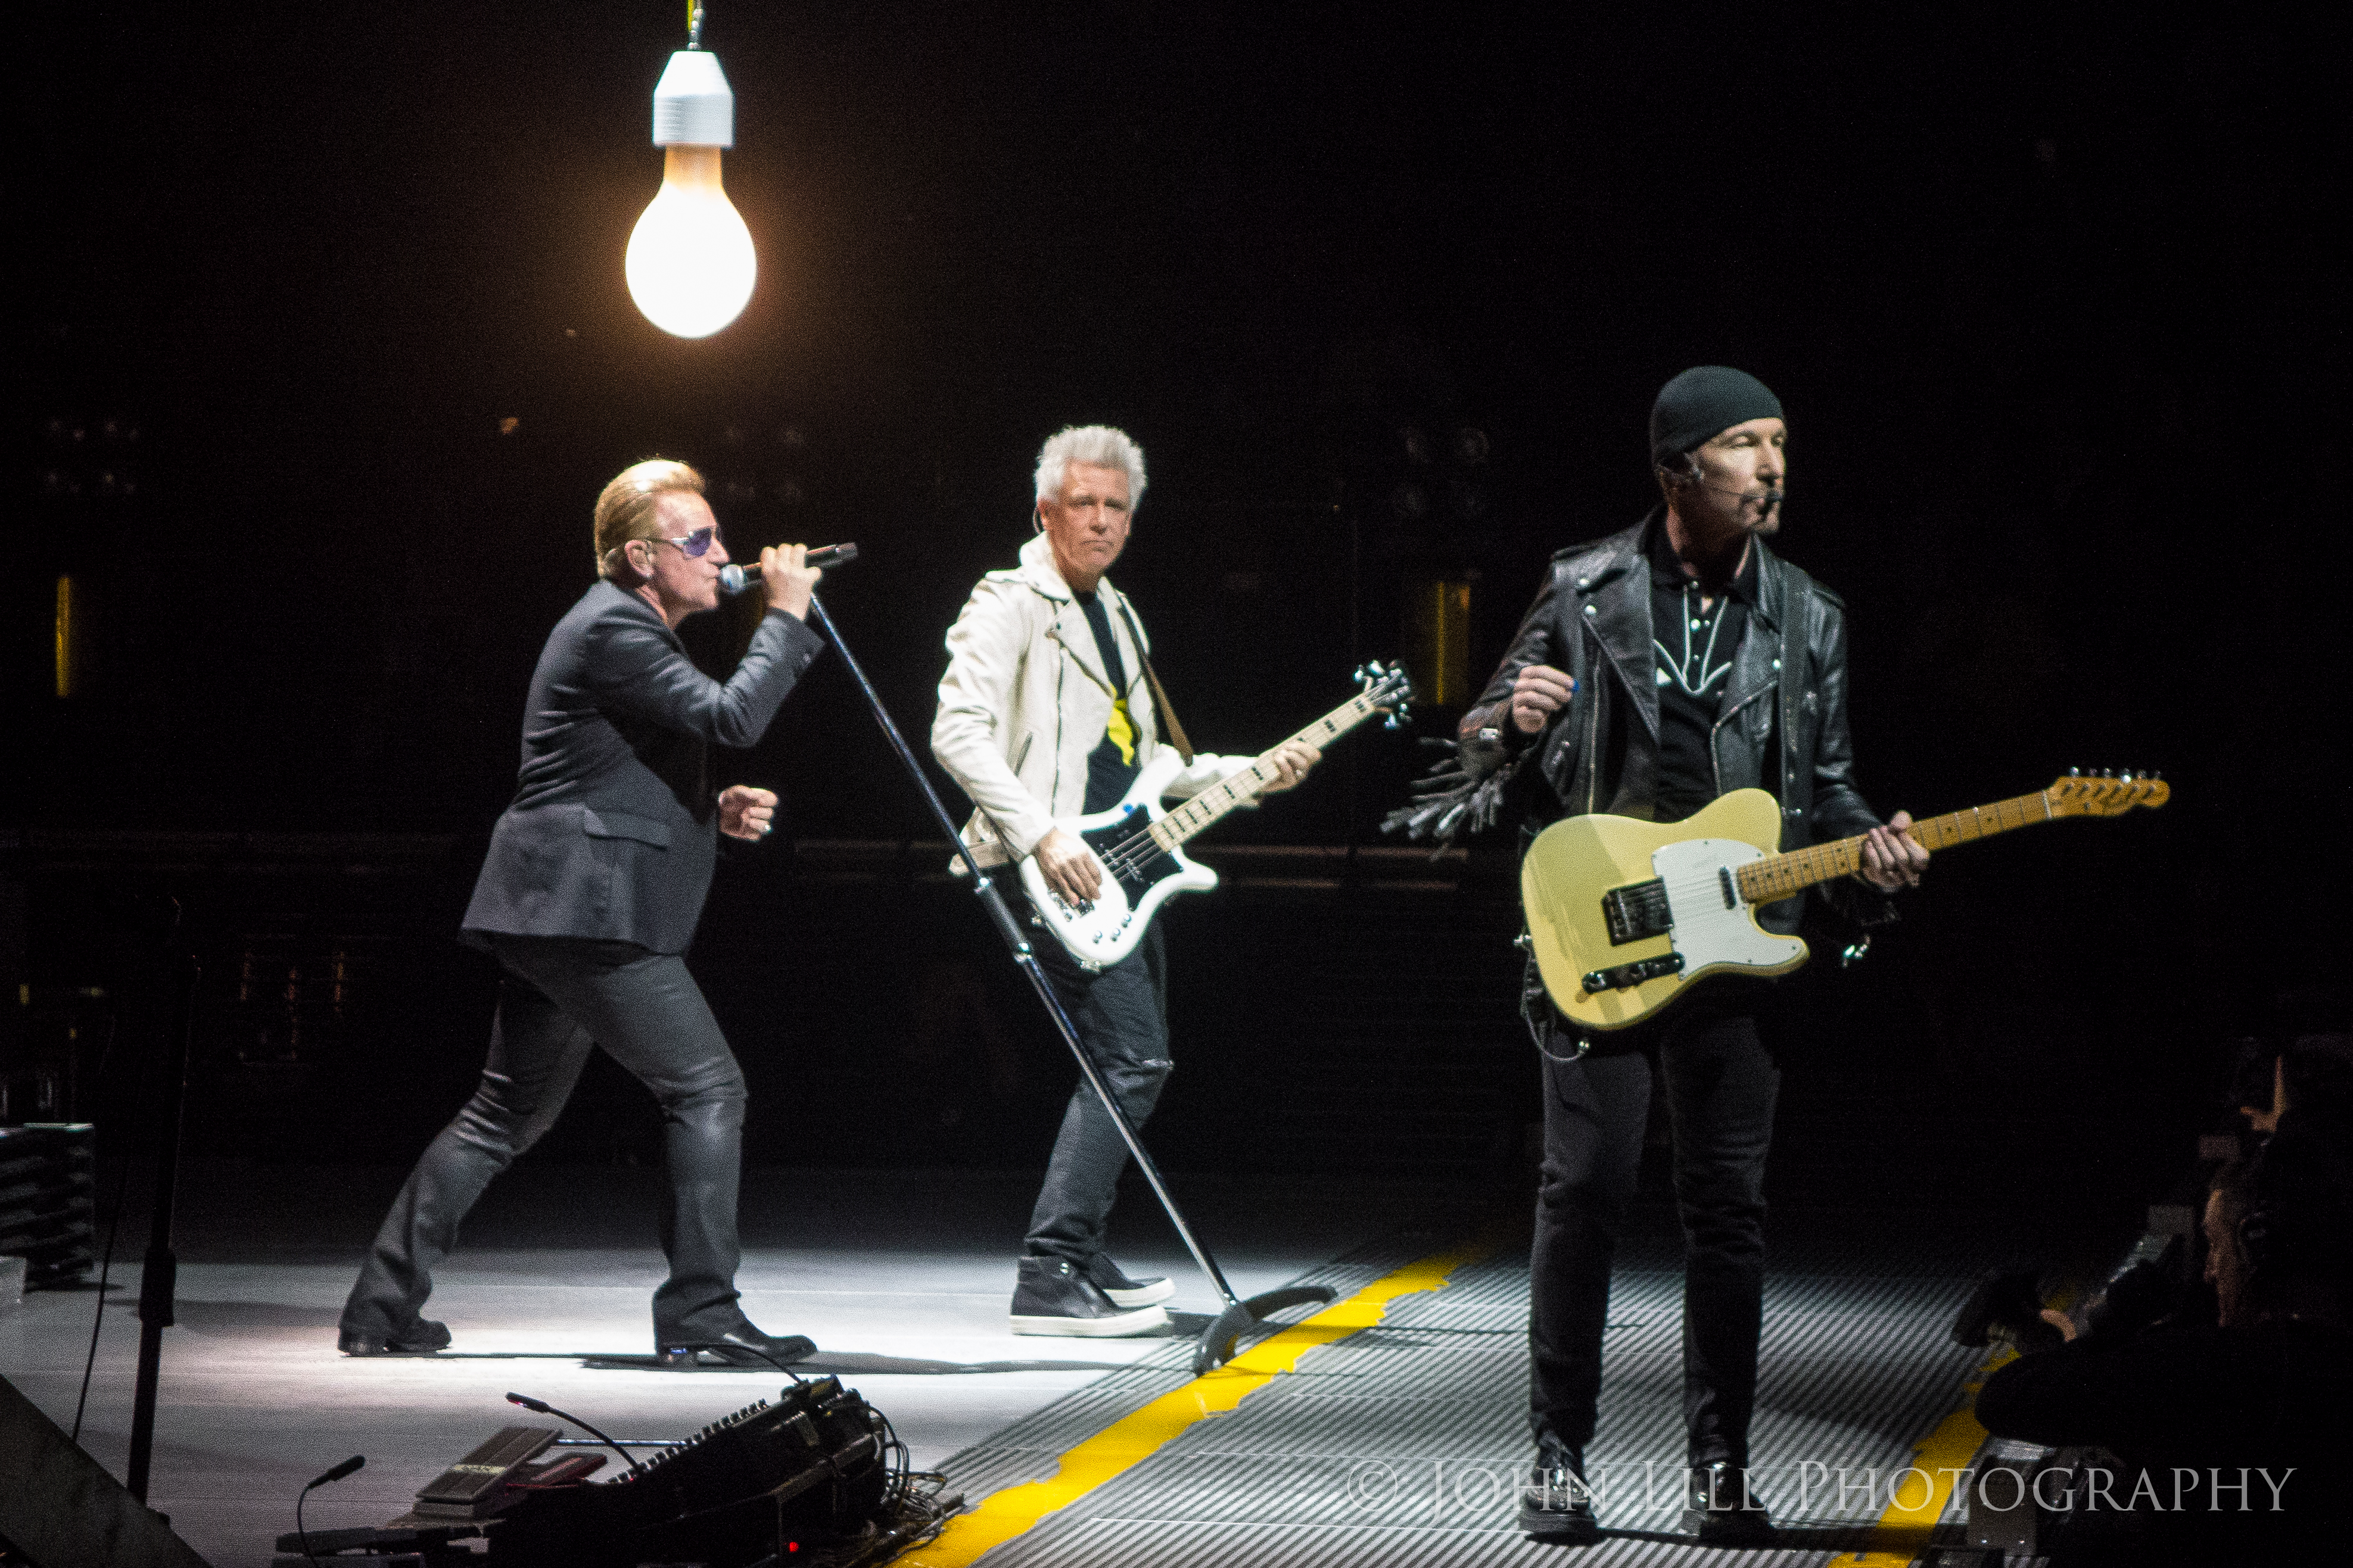 U2 perform at Rogers Arena in Vancouver, B.C. (Photo by John Lill)